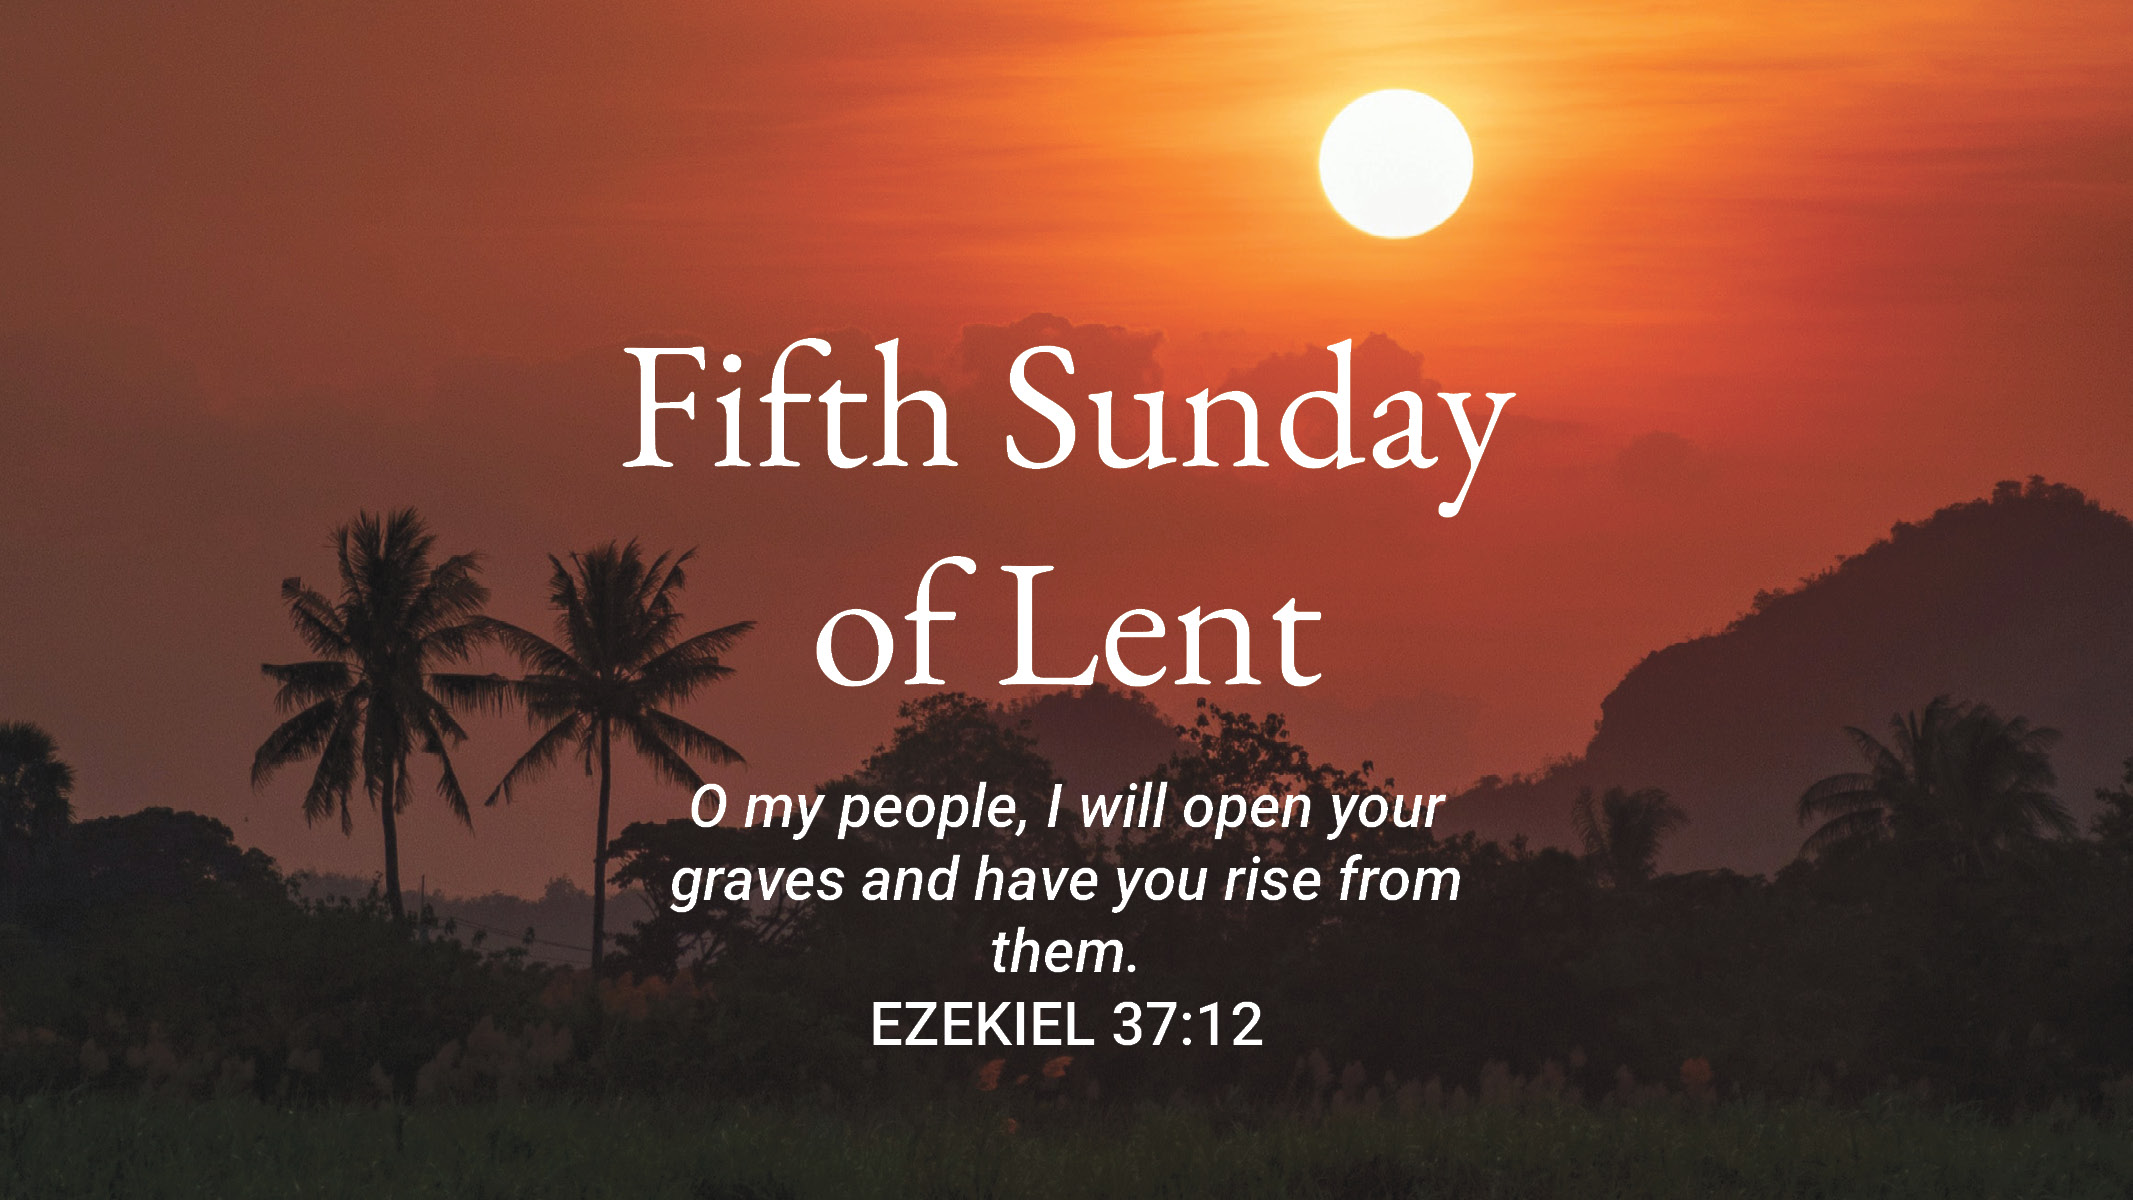 Fifth Sunday of Lent Maryknoll Office for Global Concerns